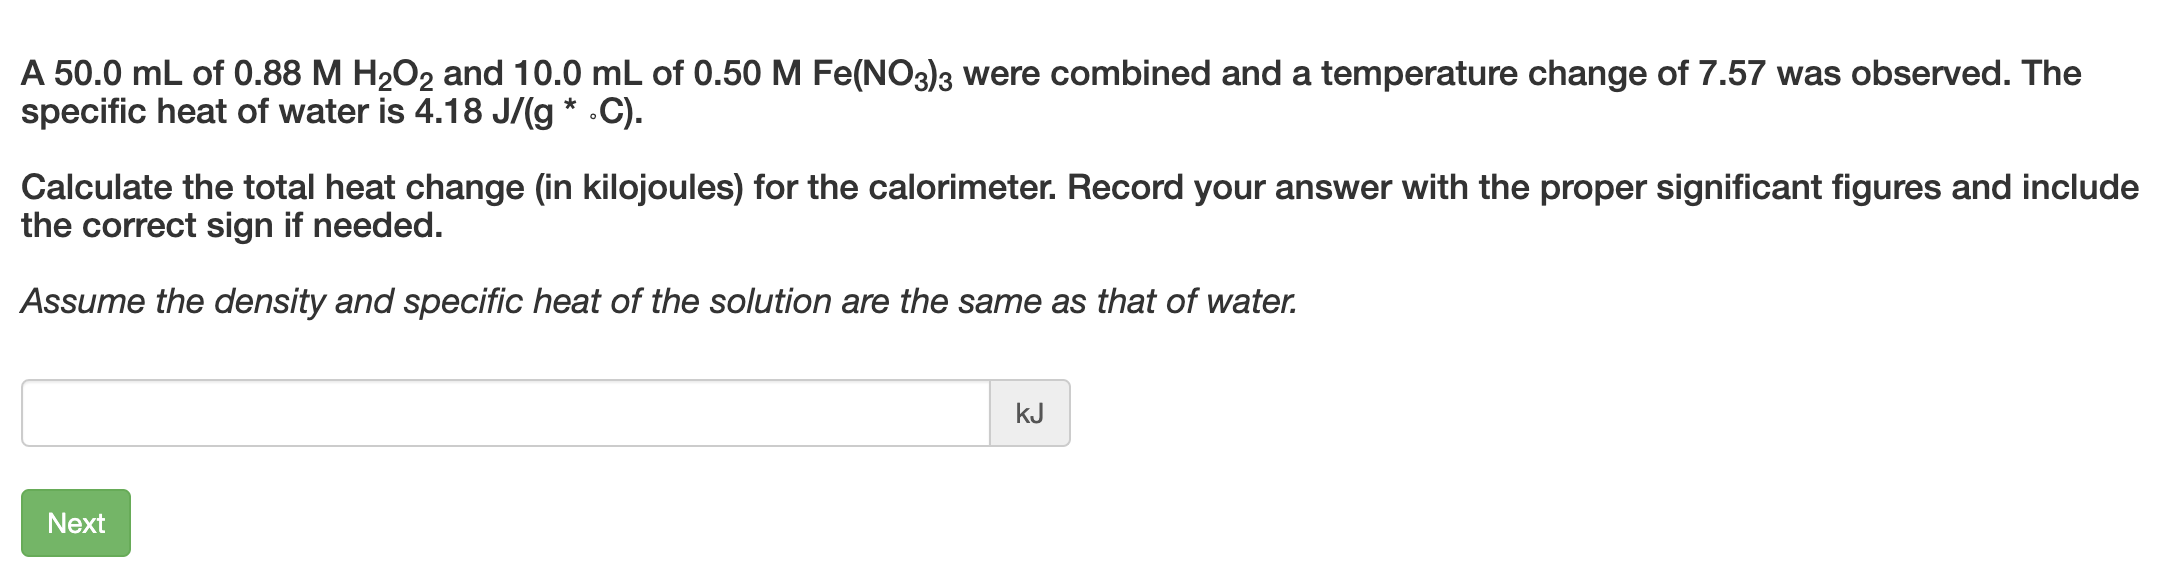 A 50.0 mL of 0.88 M H2O2 and 10.0 mL of 0.50 M Fe(NO3)3 were combined and a temperature change of 7.57 was observed. The
specific heat of water is 4.18 J/(g * .C).
Calculate the total heat change (in kilojoules) for the calorimeter. Record your answer with the proper significant figures and include
the correct sign if needed.
Assume the density and specific heat of the solution are the same as that of water.
kJ
Next
